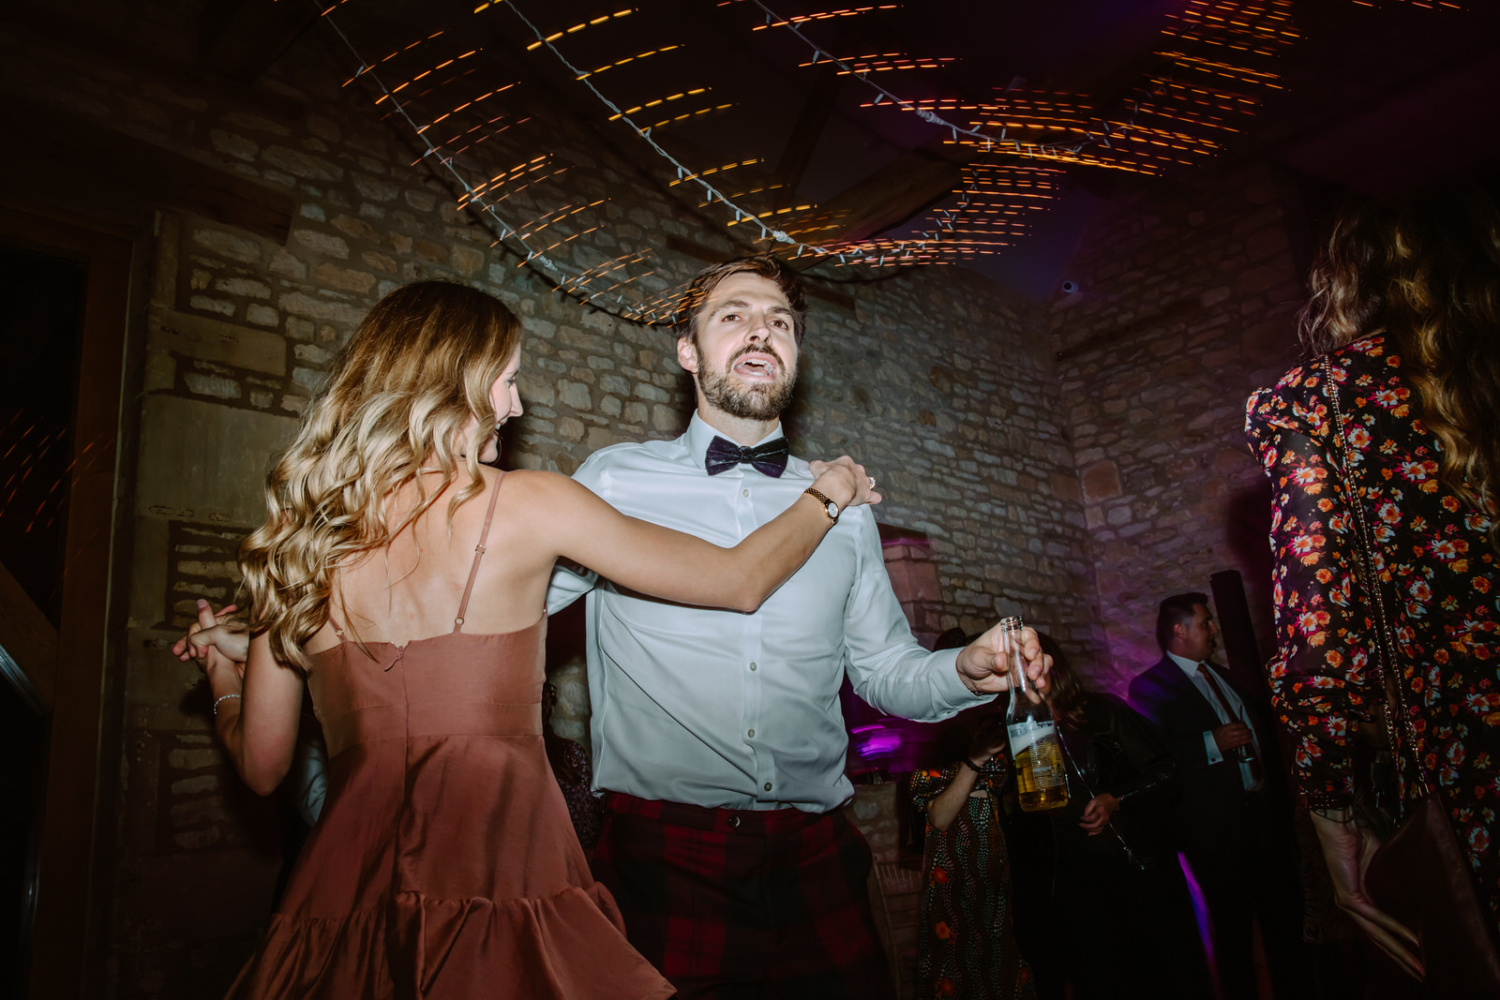 Wedding guests dancing on the dance floor at a party.